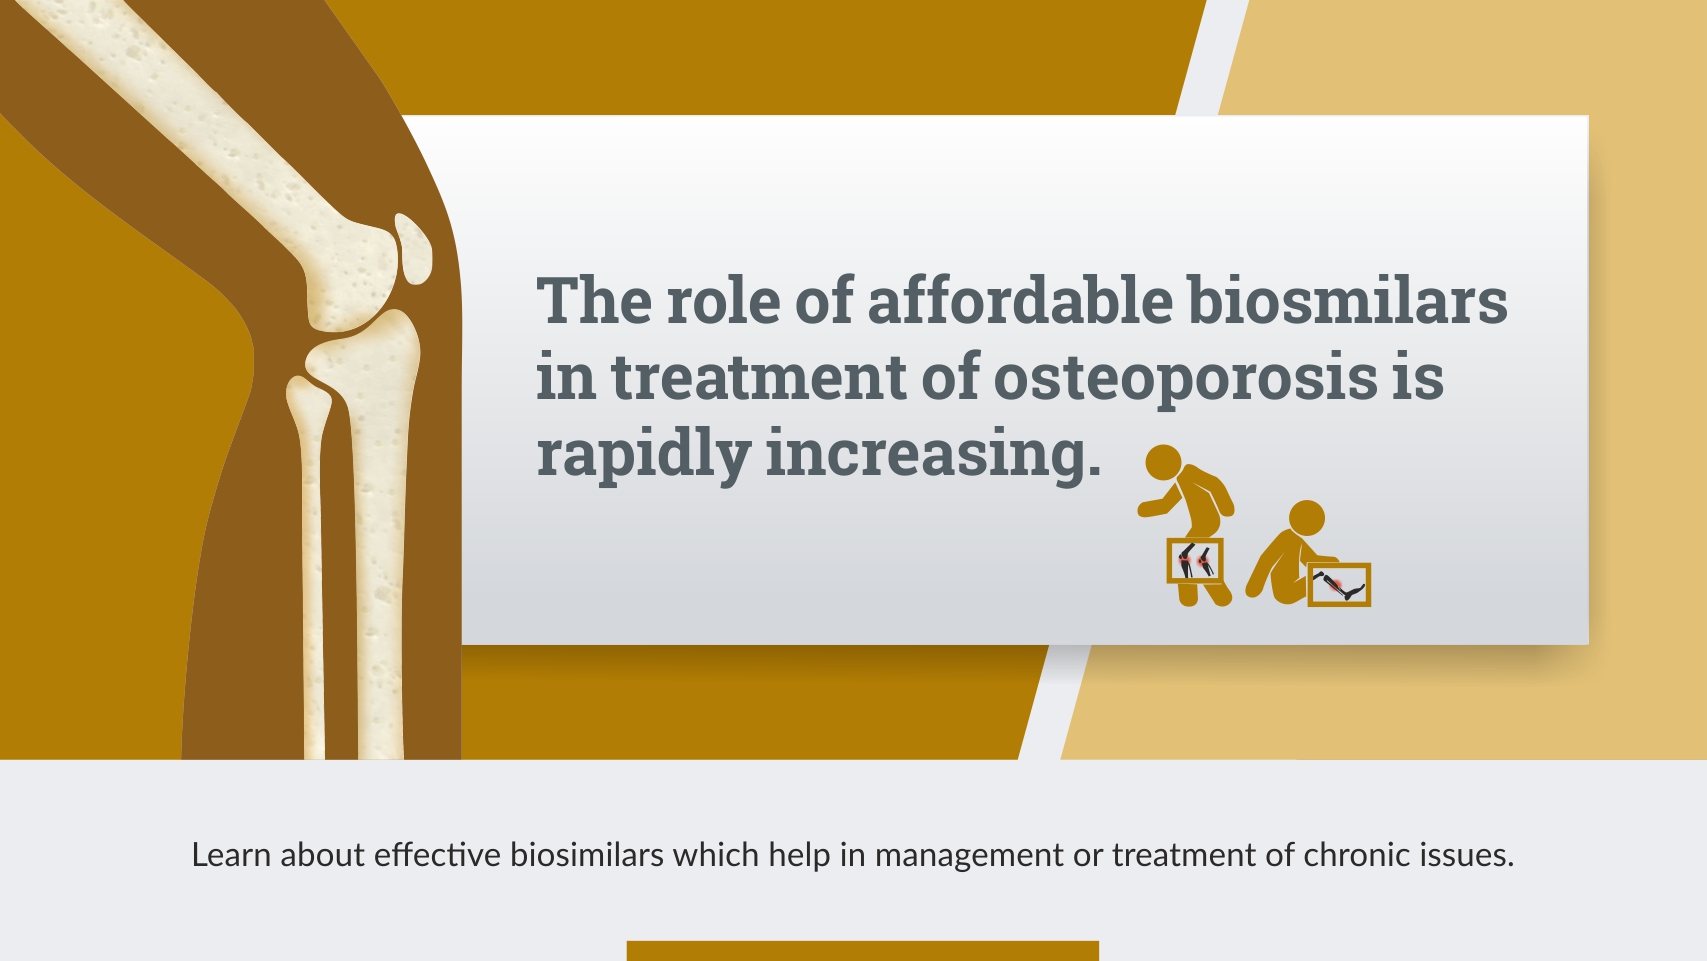 Quality and Affordability continue to remain our focus with the launch of Biosimilars in Orthopaedics